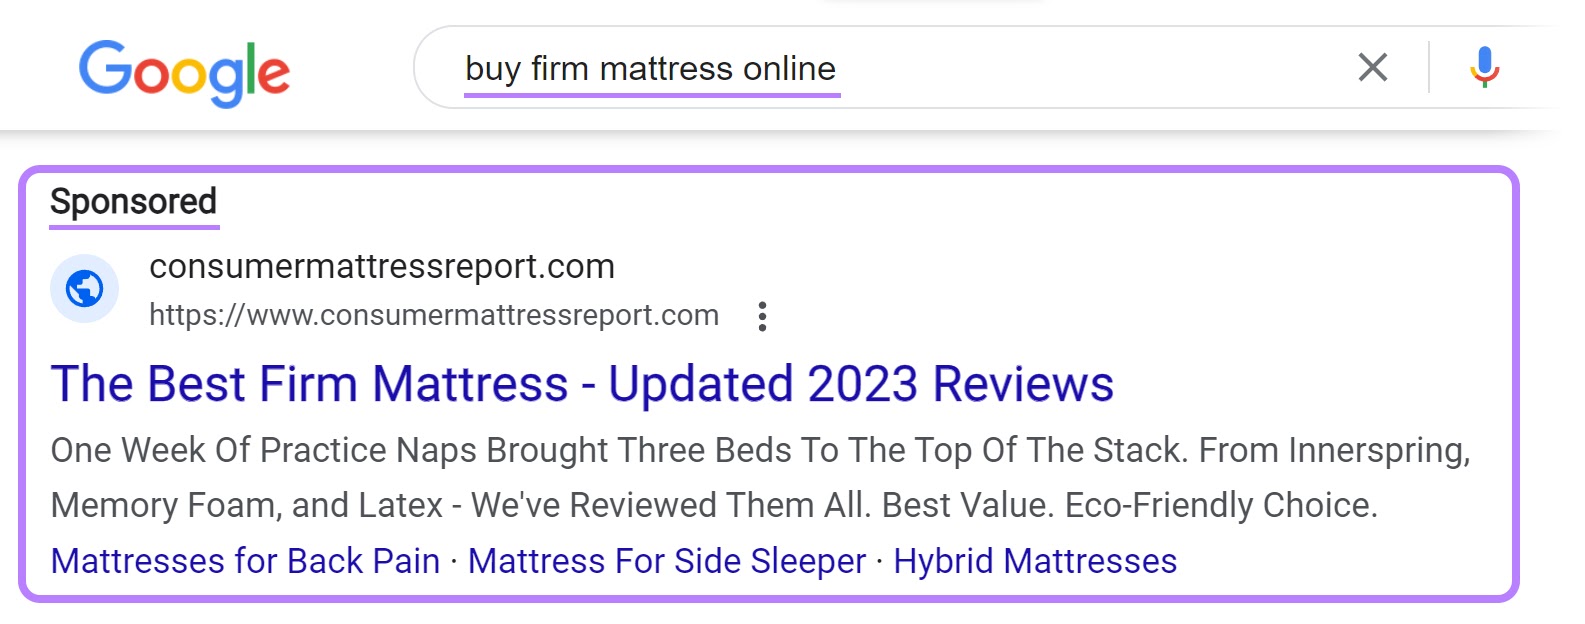 A search ad on Google for “buy firm mattress online” query